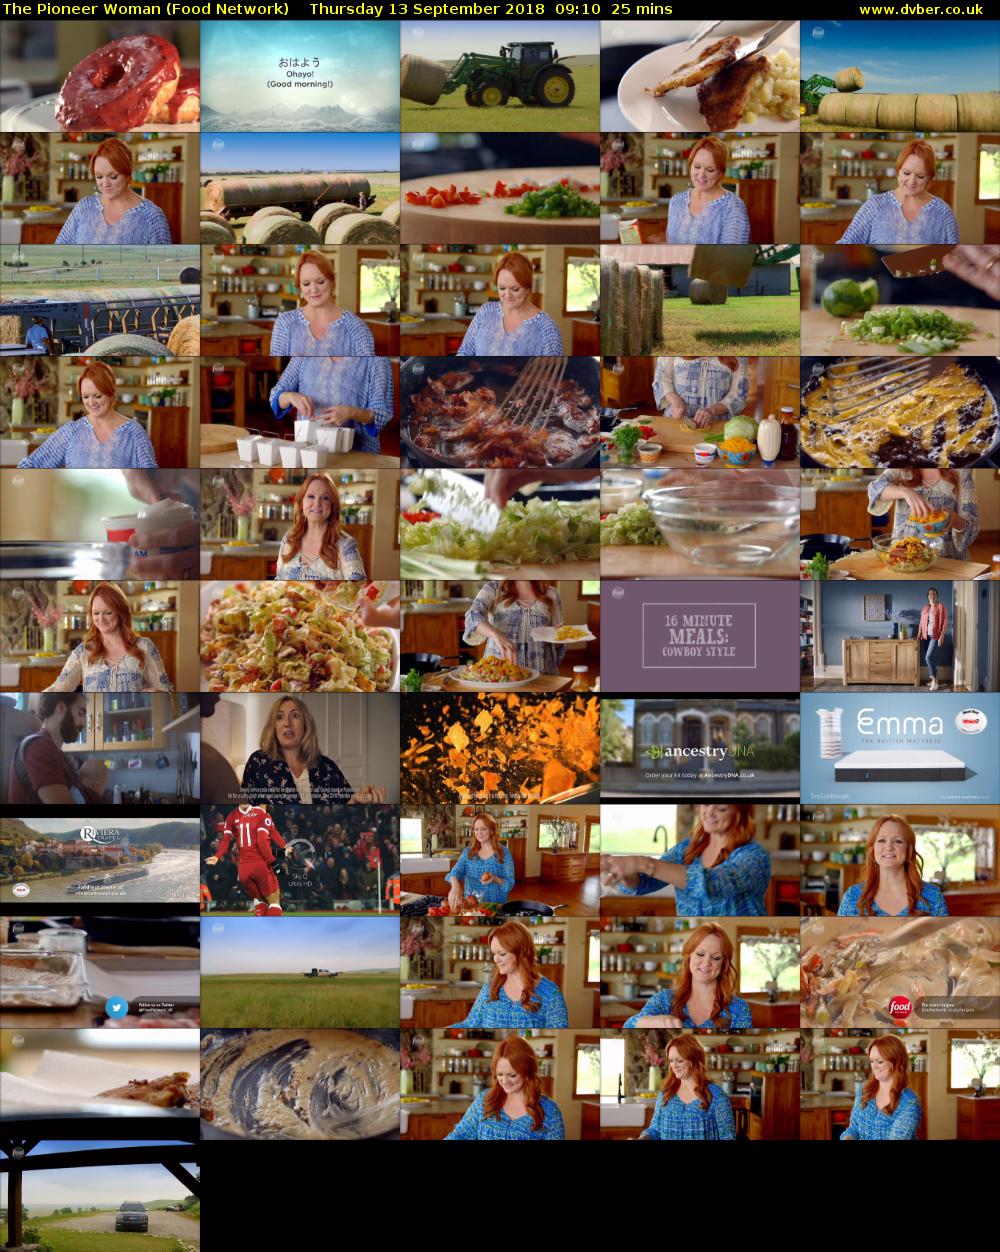 The Pioneer Woman (Food Network) Thursday 13 September 2018 09:10 - 09:35